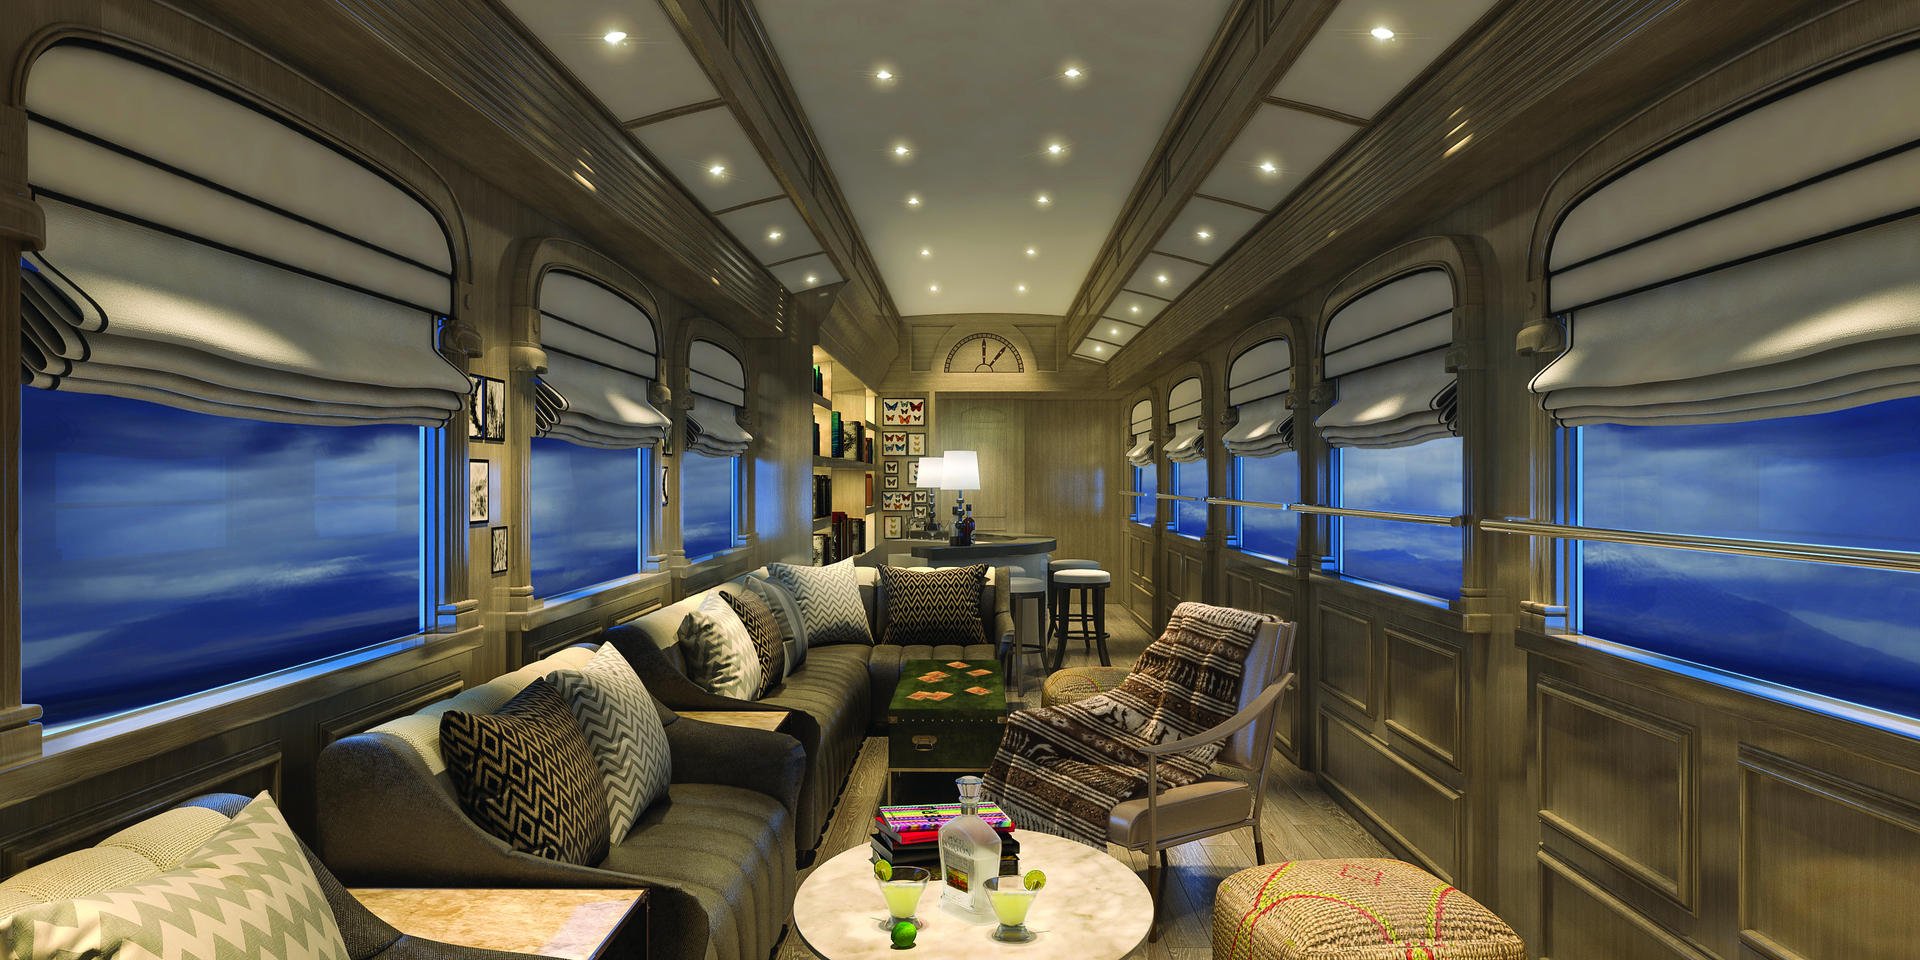 The Venice Simplon-Orient Express Just Got More Luxurious—Here's